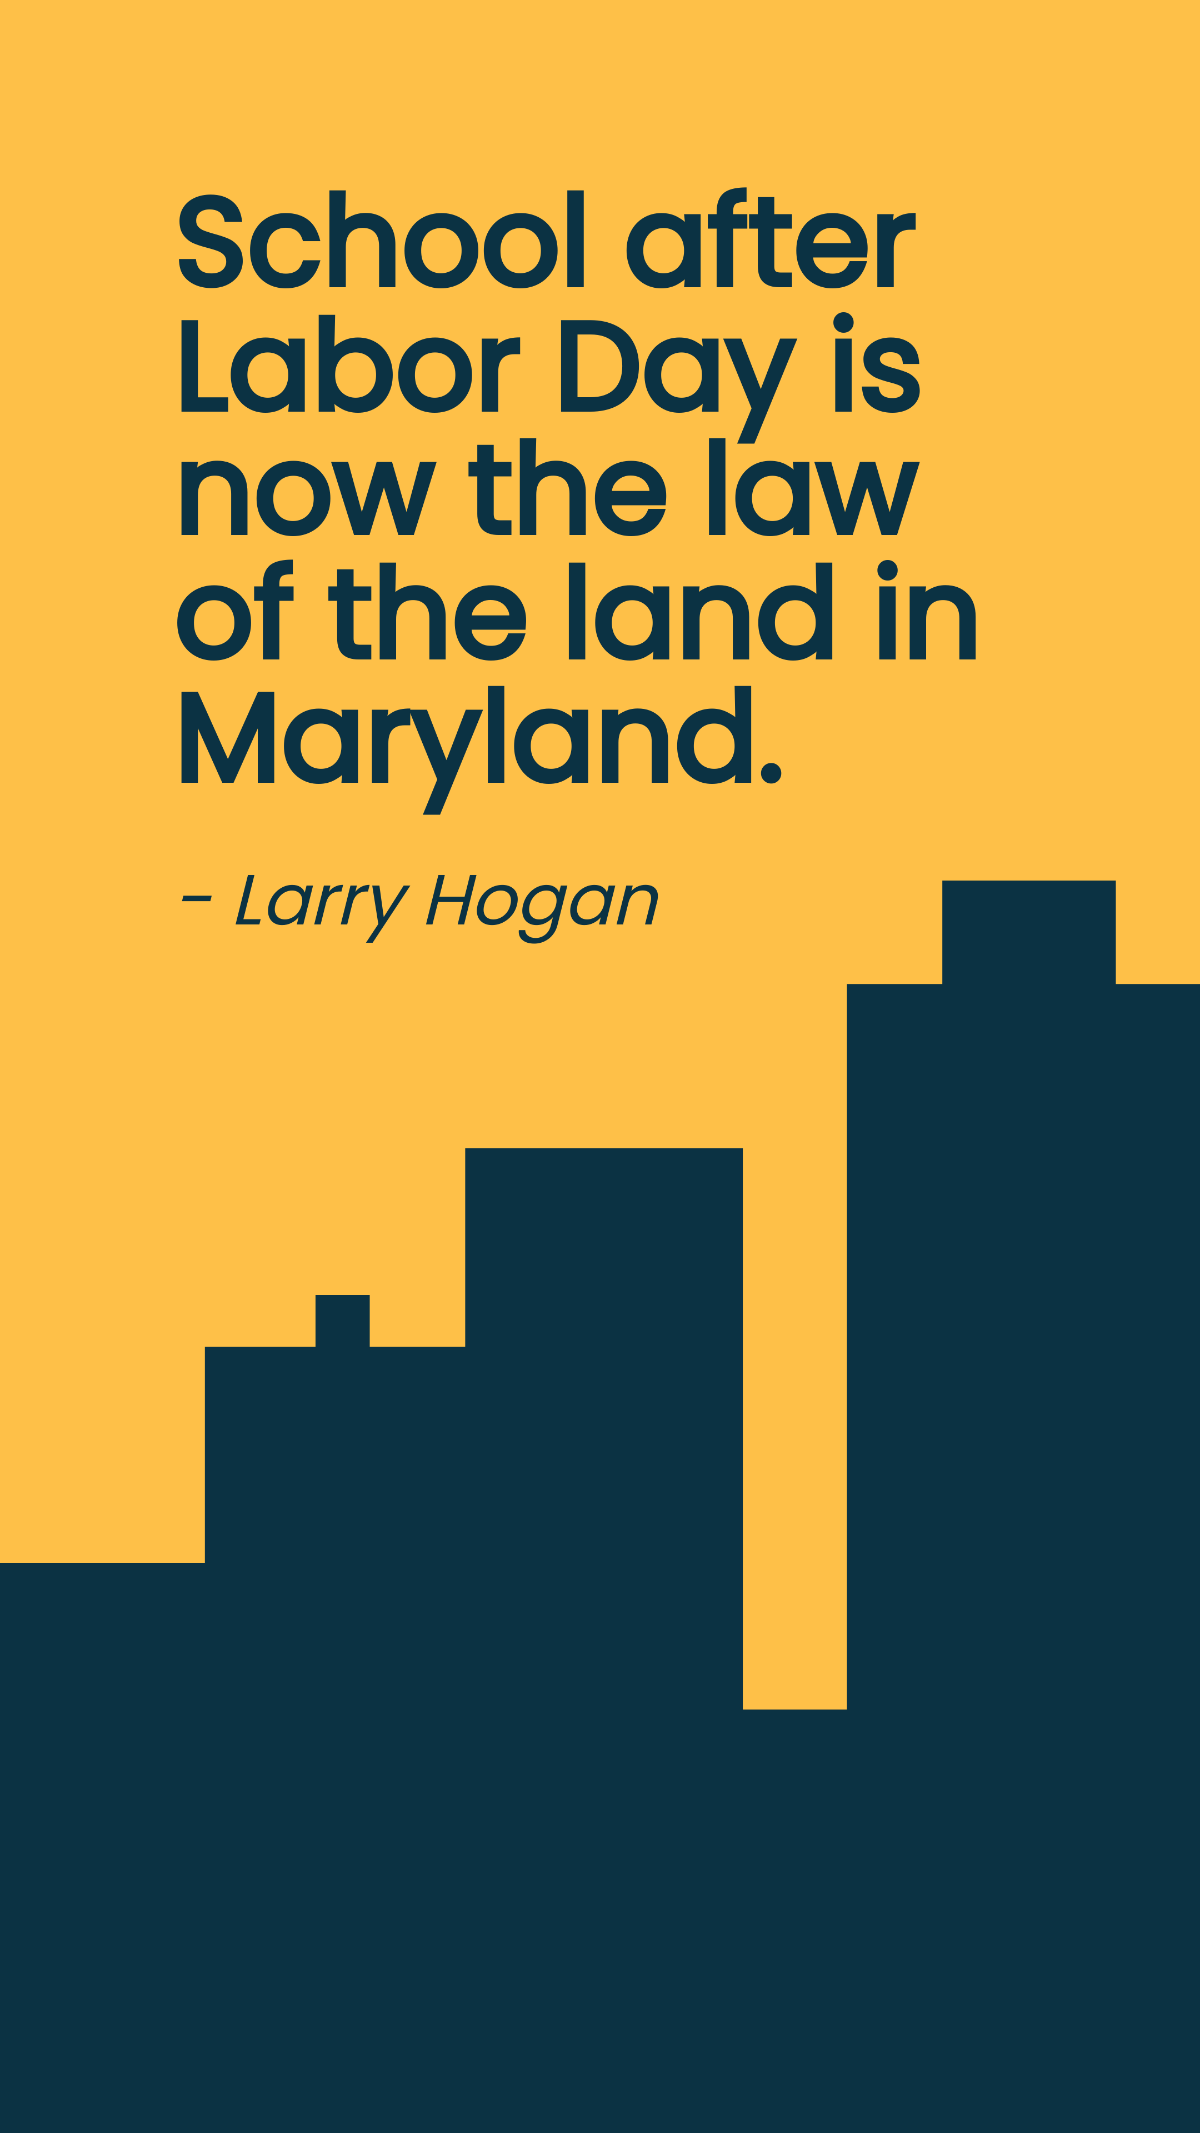 Larry Hogan - School after Labor Day is now the law of the land in Maryland. Template